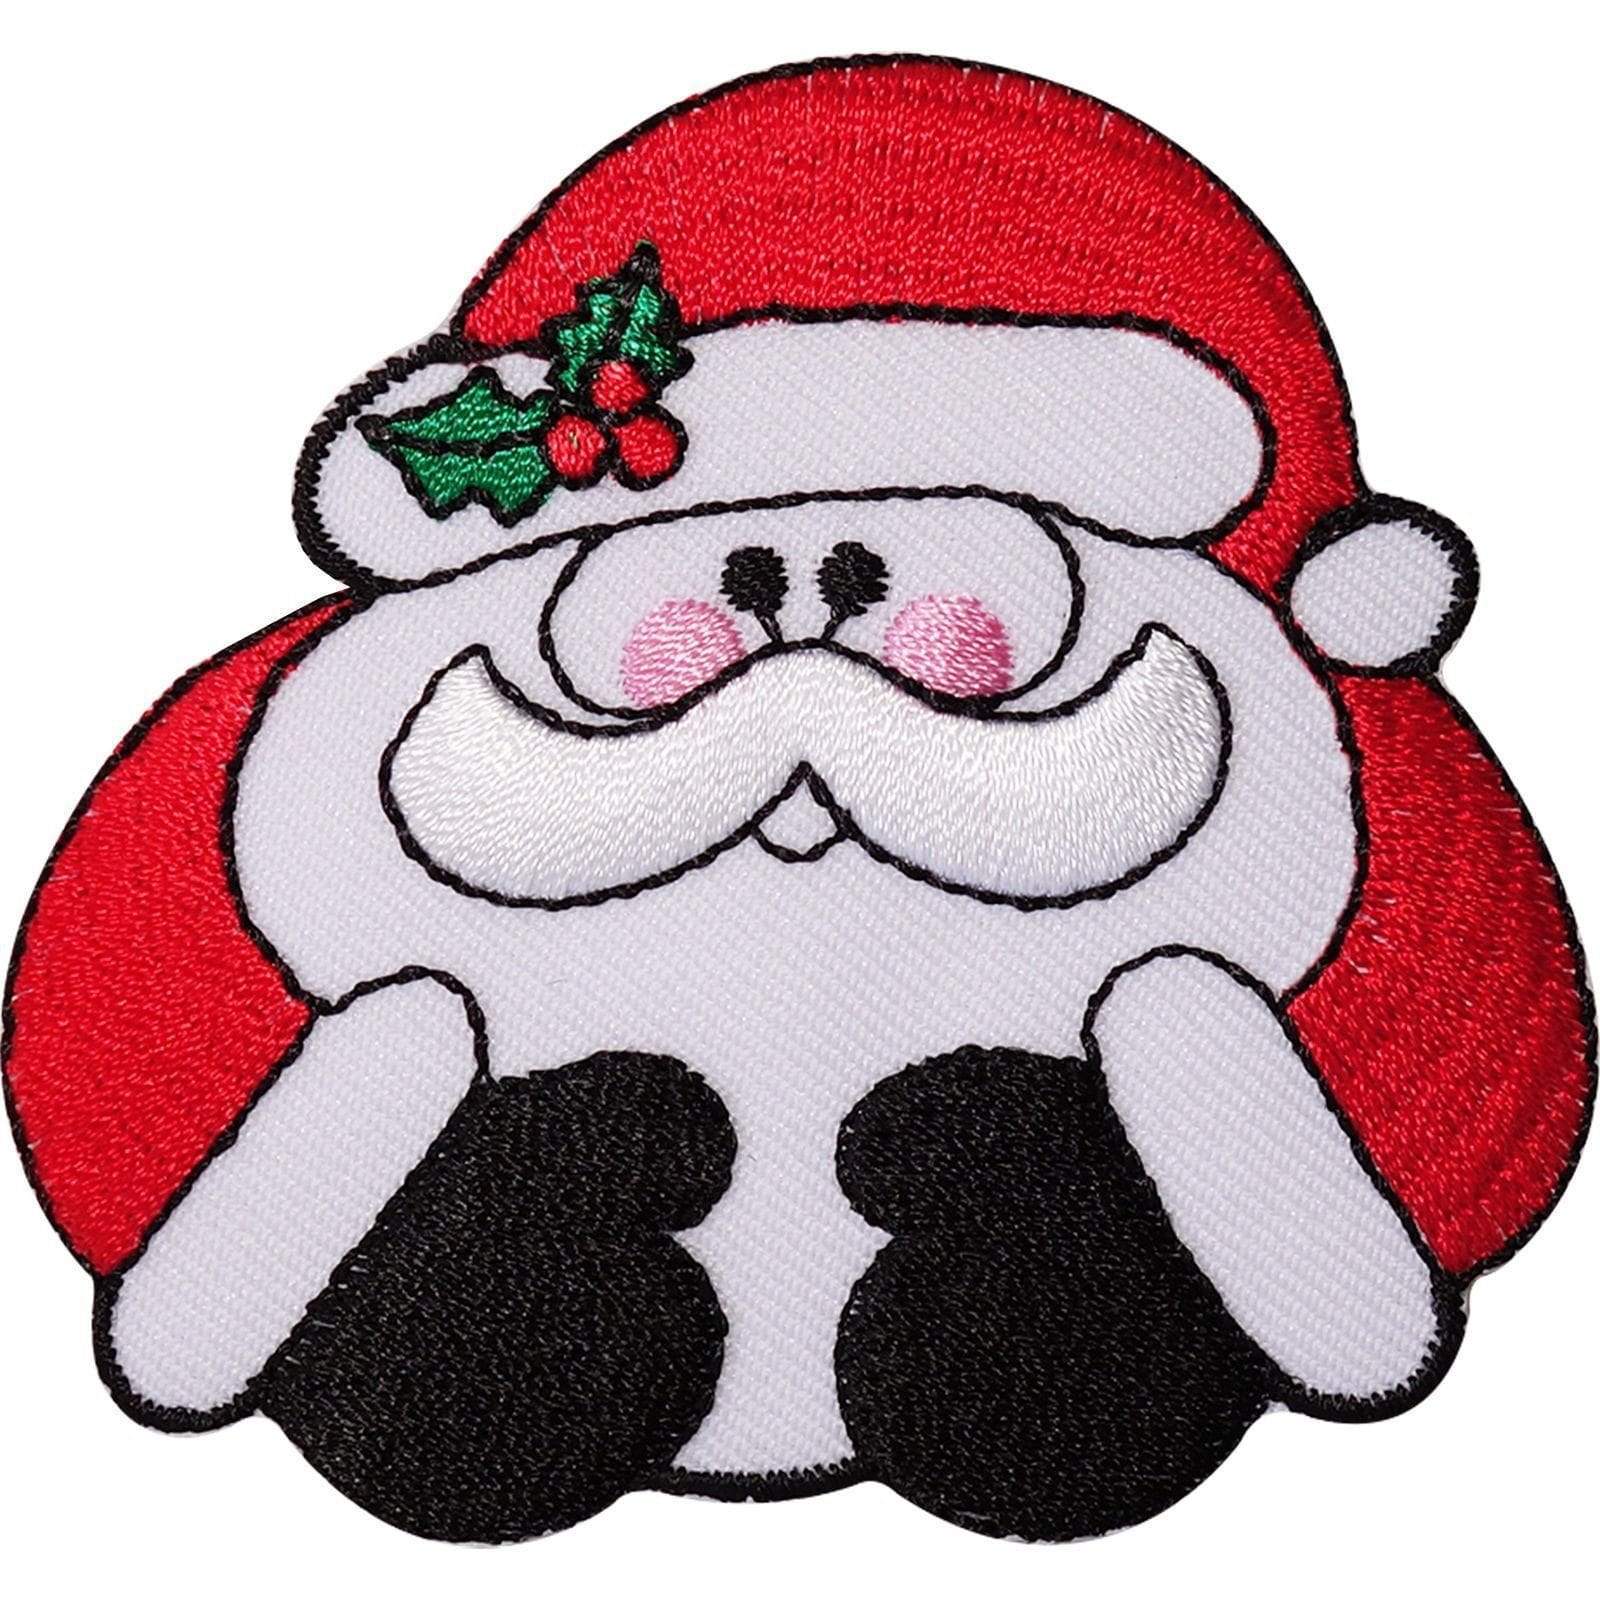 Father Christmas Embroidered Iron / Sew On Patch Santa Decoration Crafts Badge